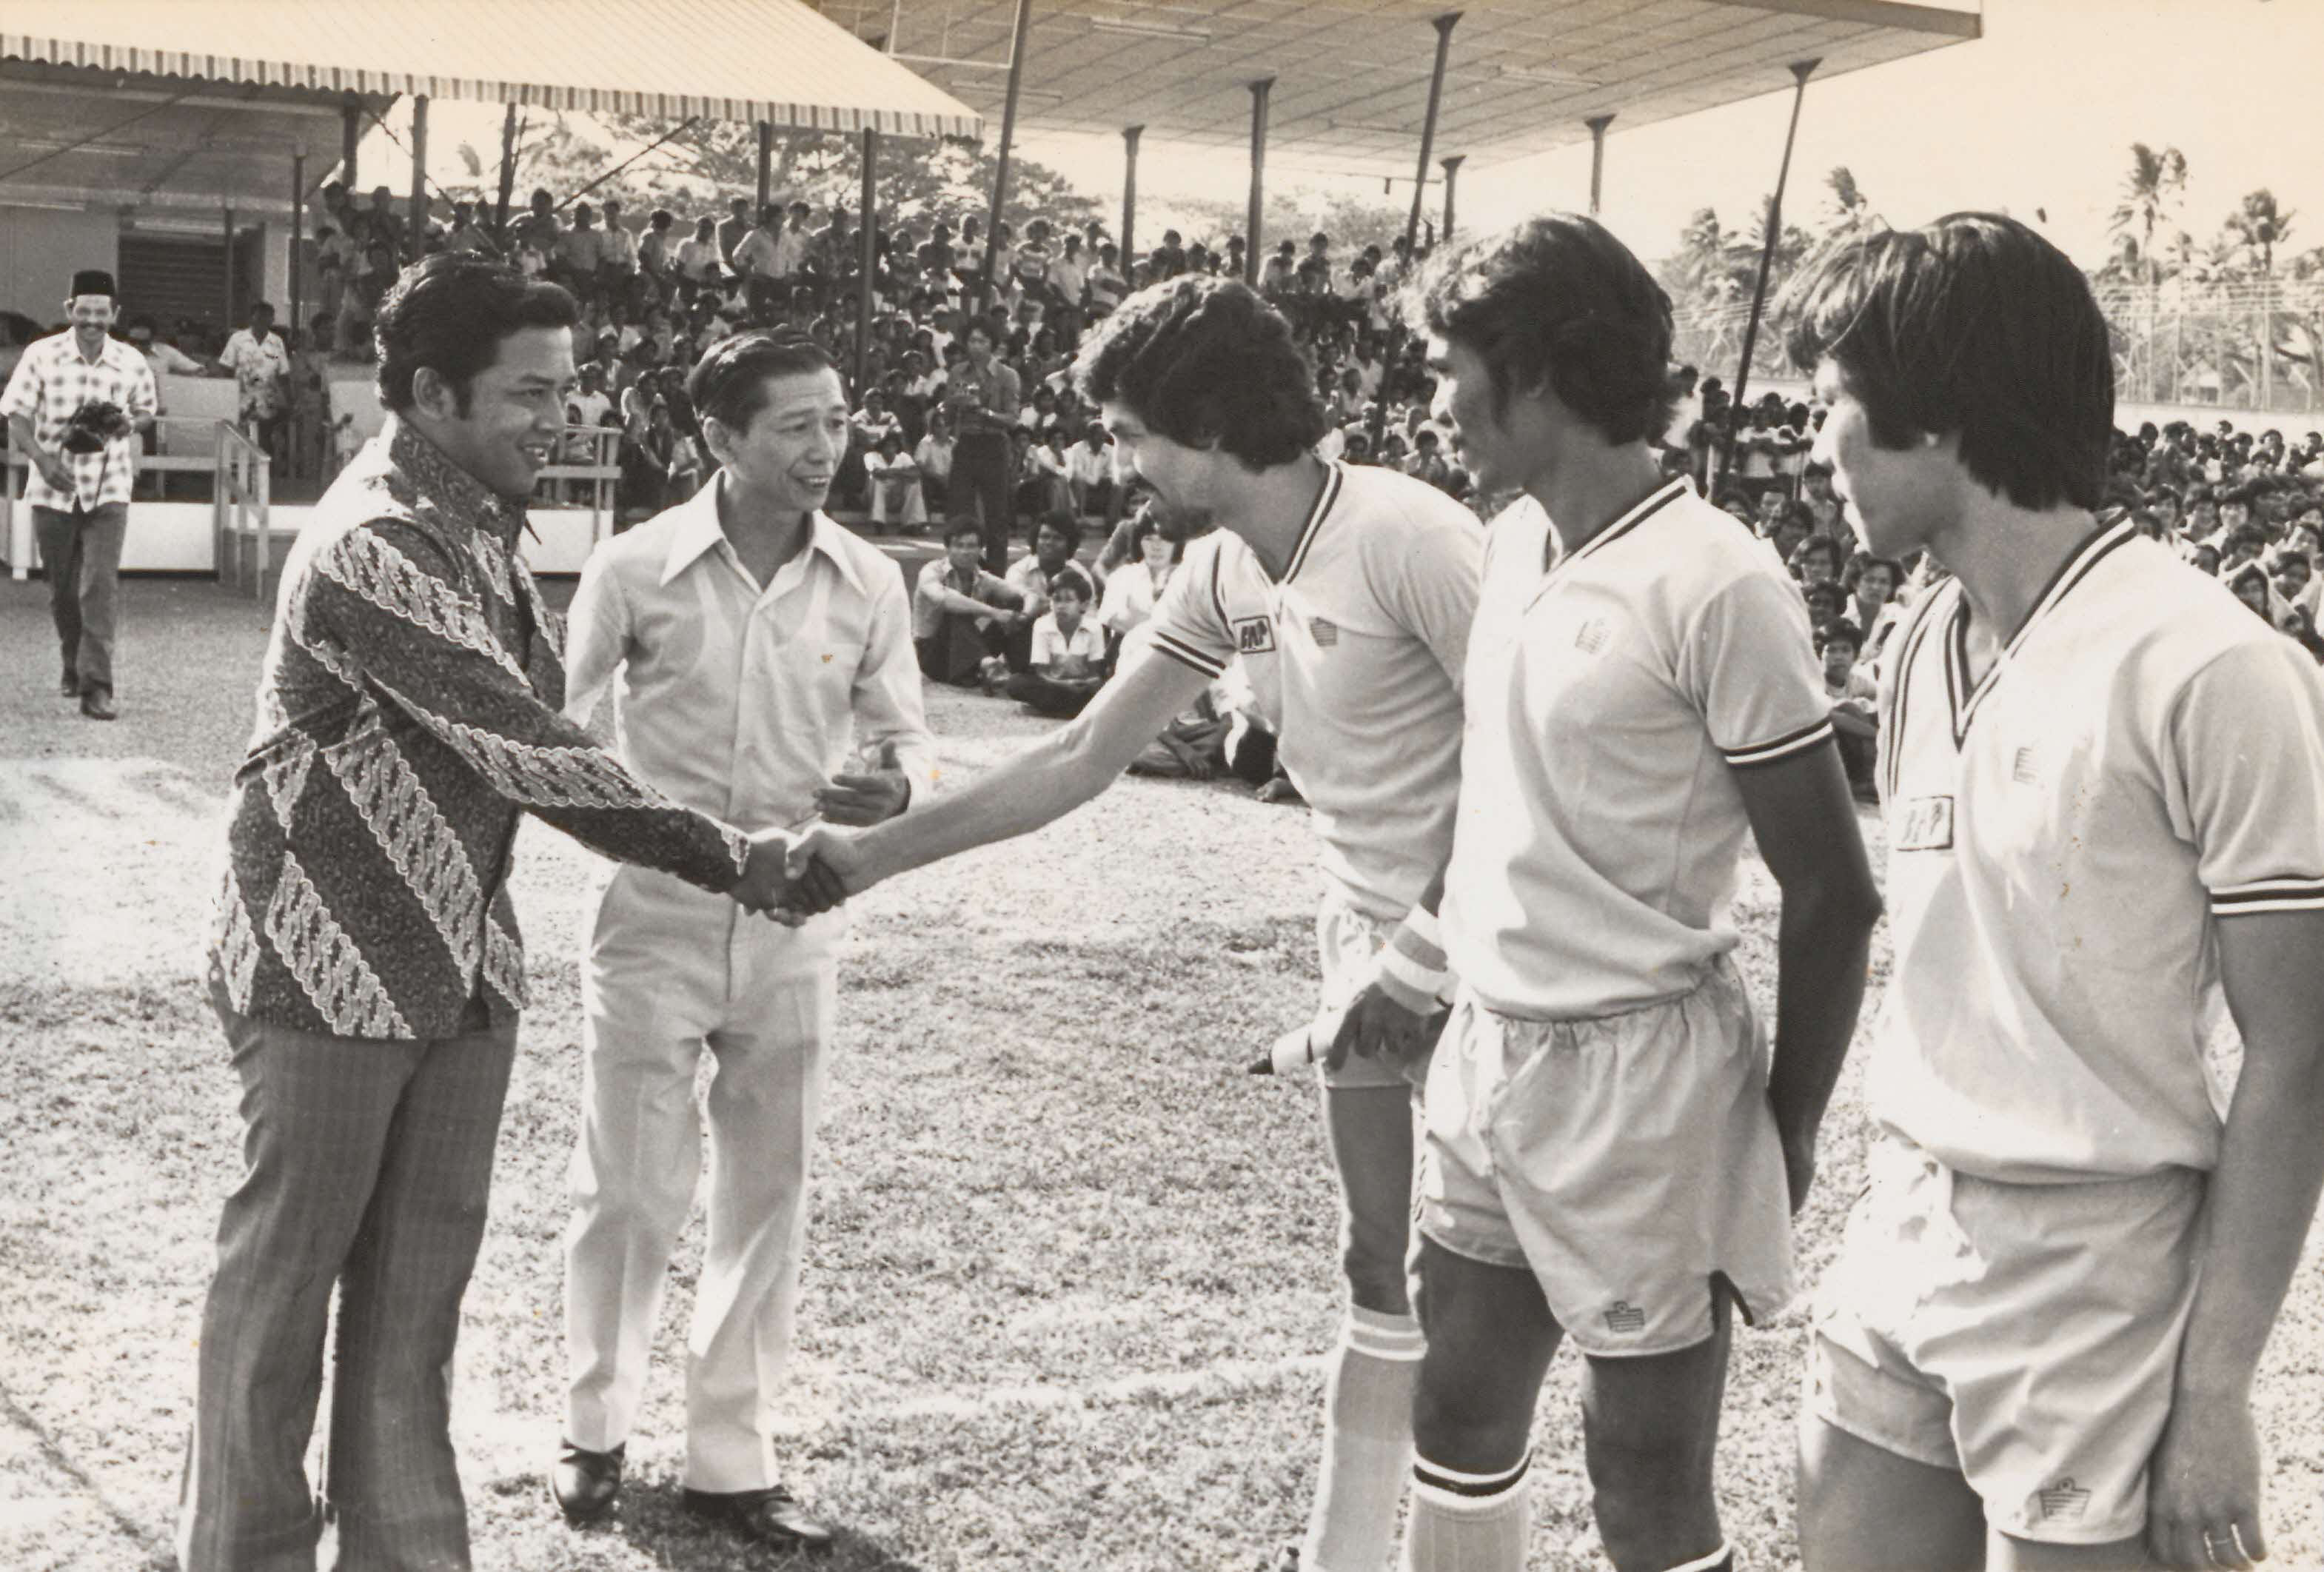 Chia Boon Leong introducing players from the Football Association of Singapore team, 1978